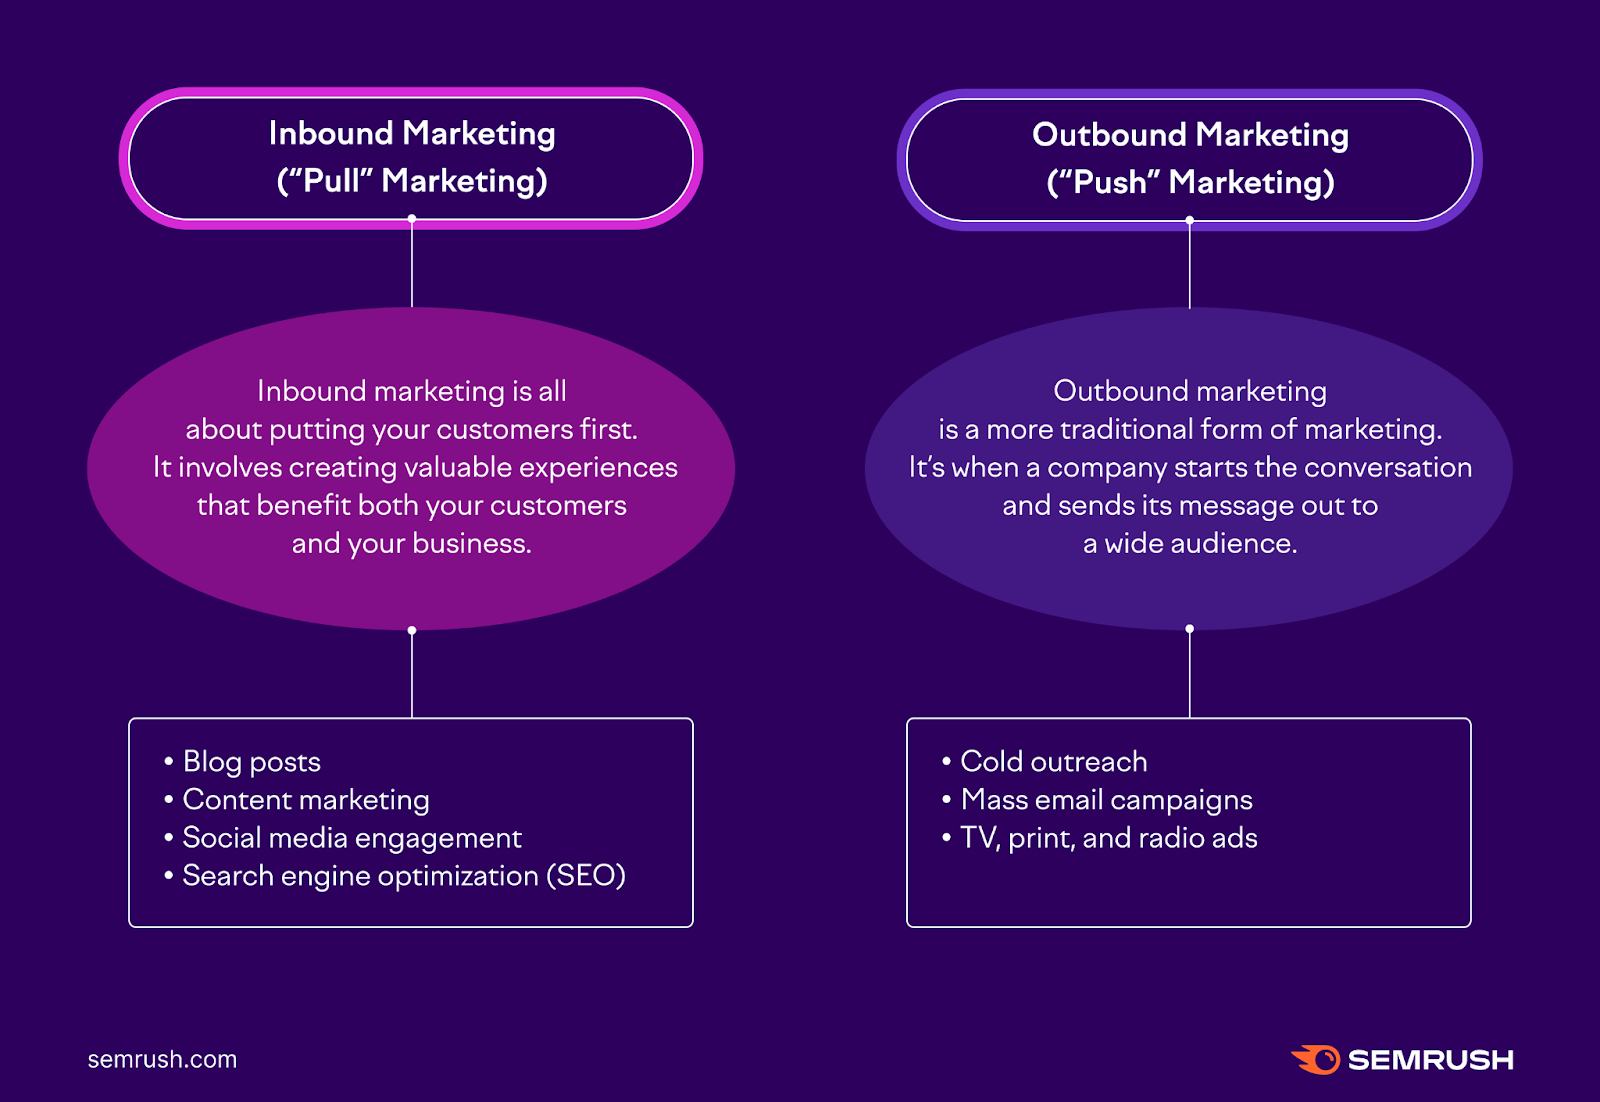 A visual compering inbound marketing and outbound marketing definitions, and tactics